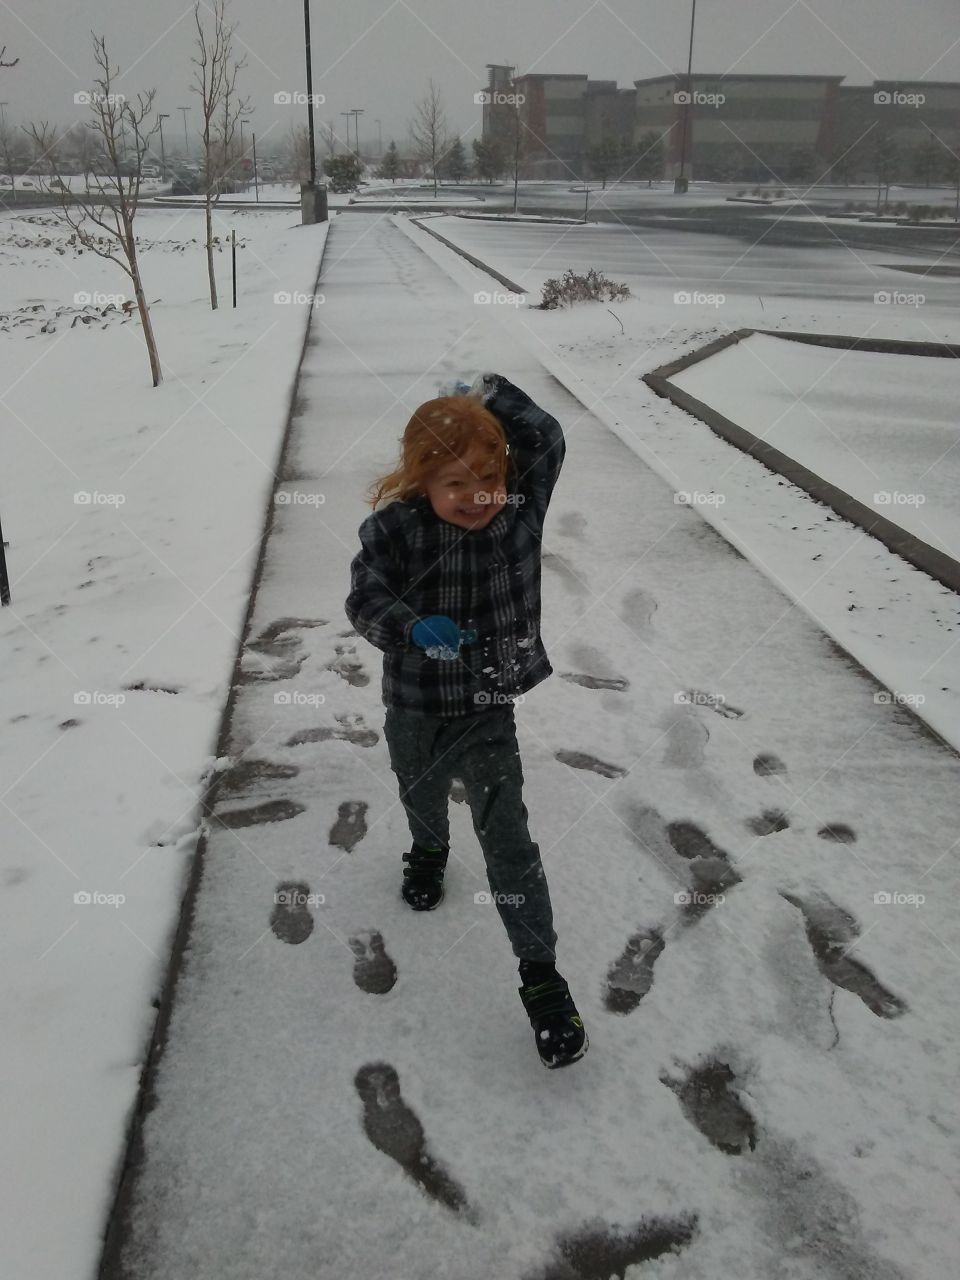 Fun in the snow on a cold and gloomy winter day